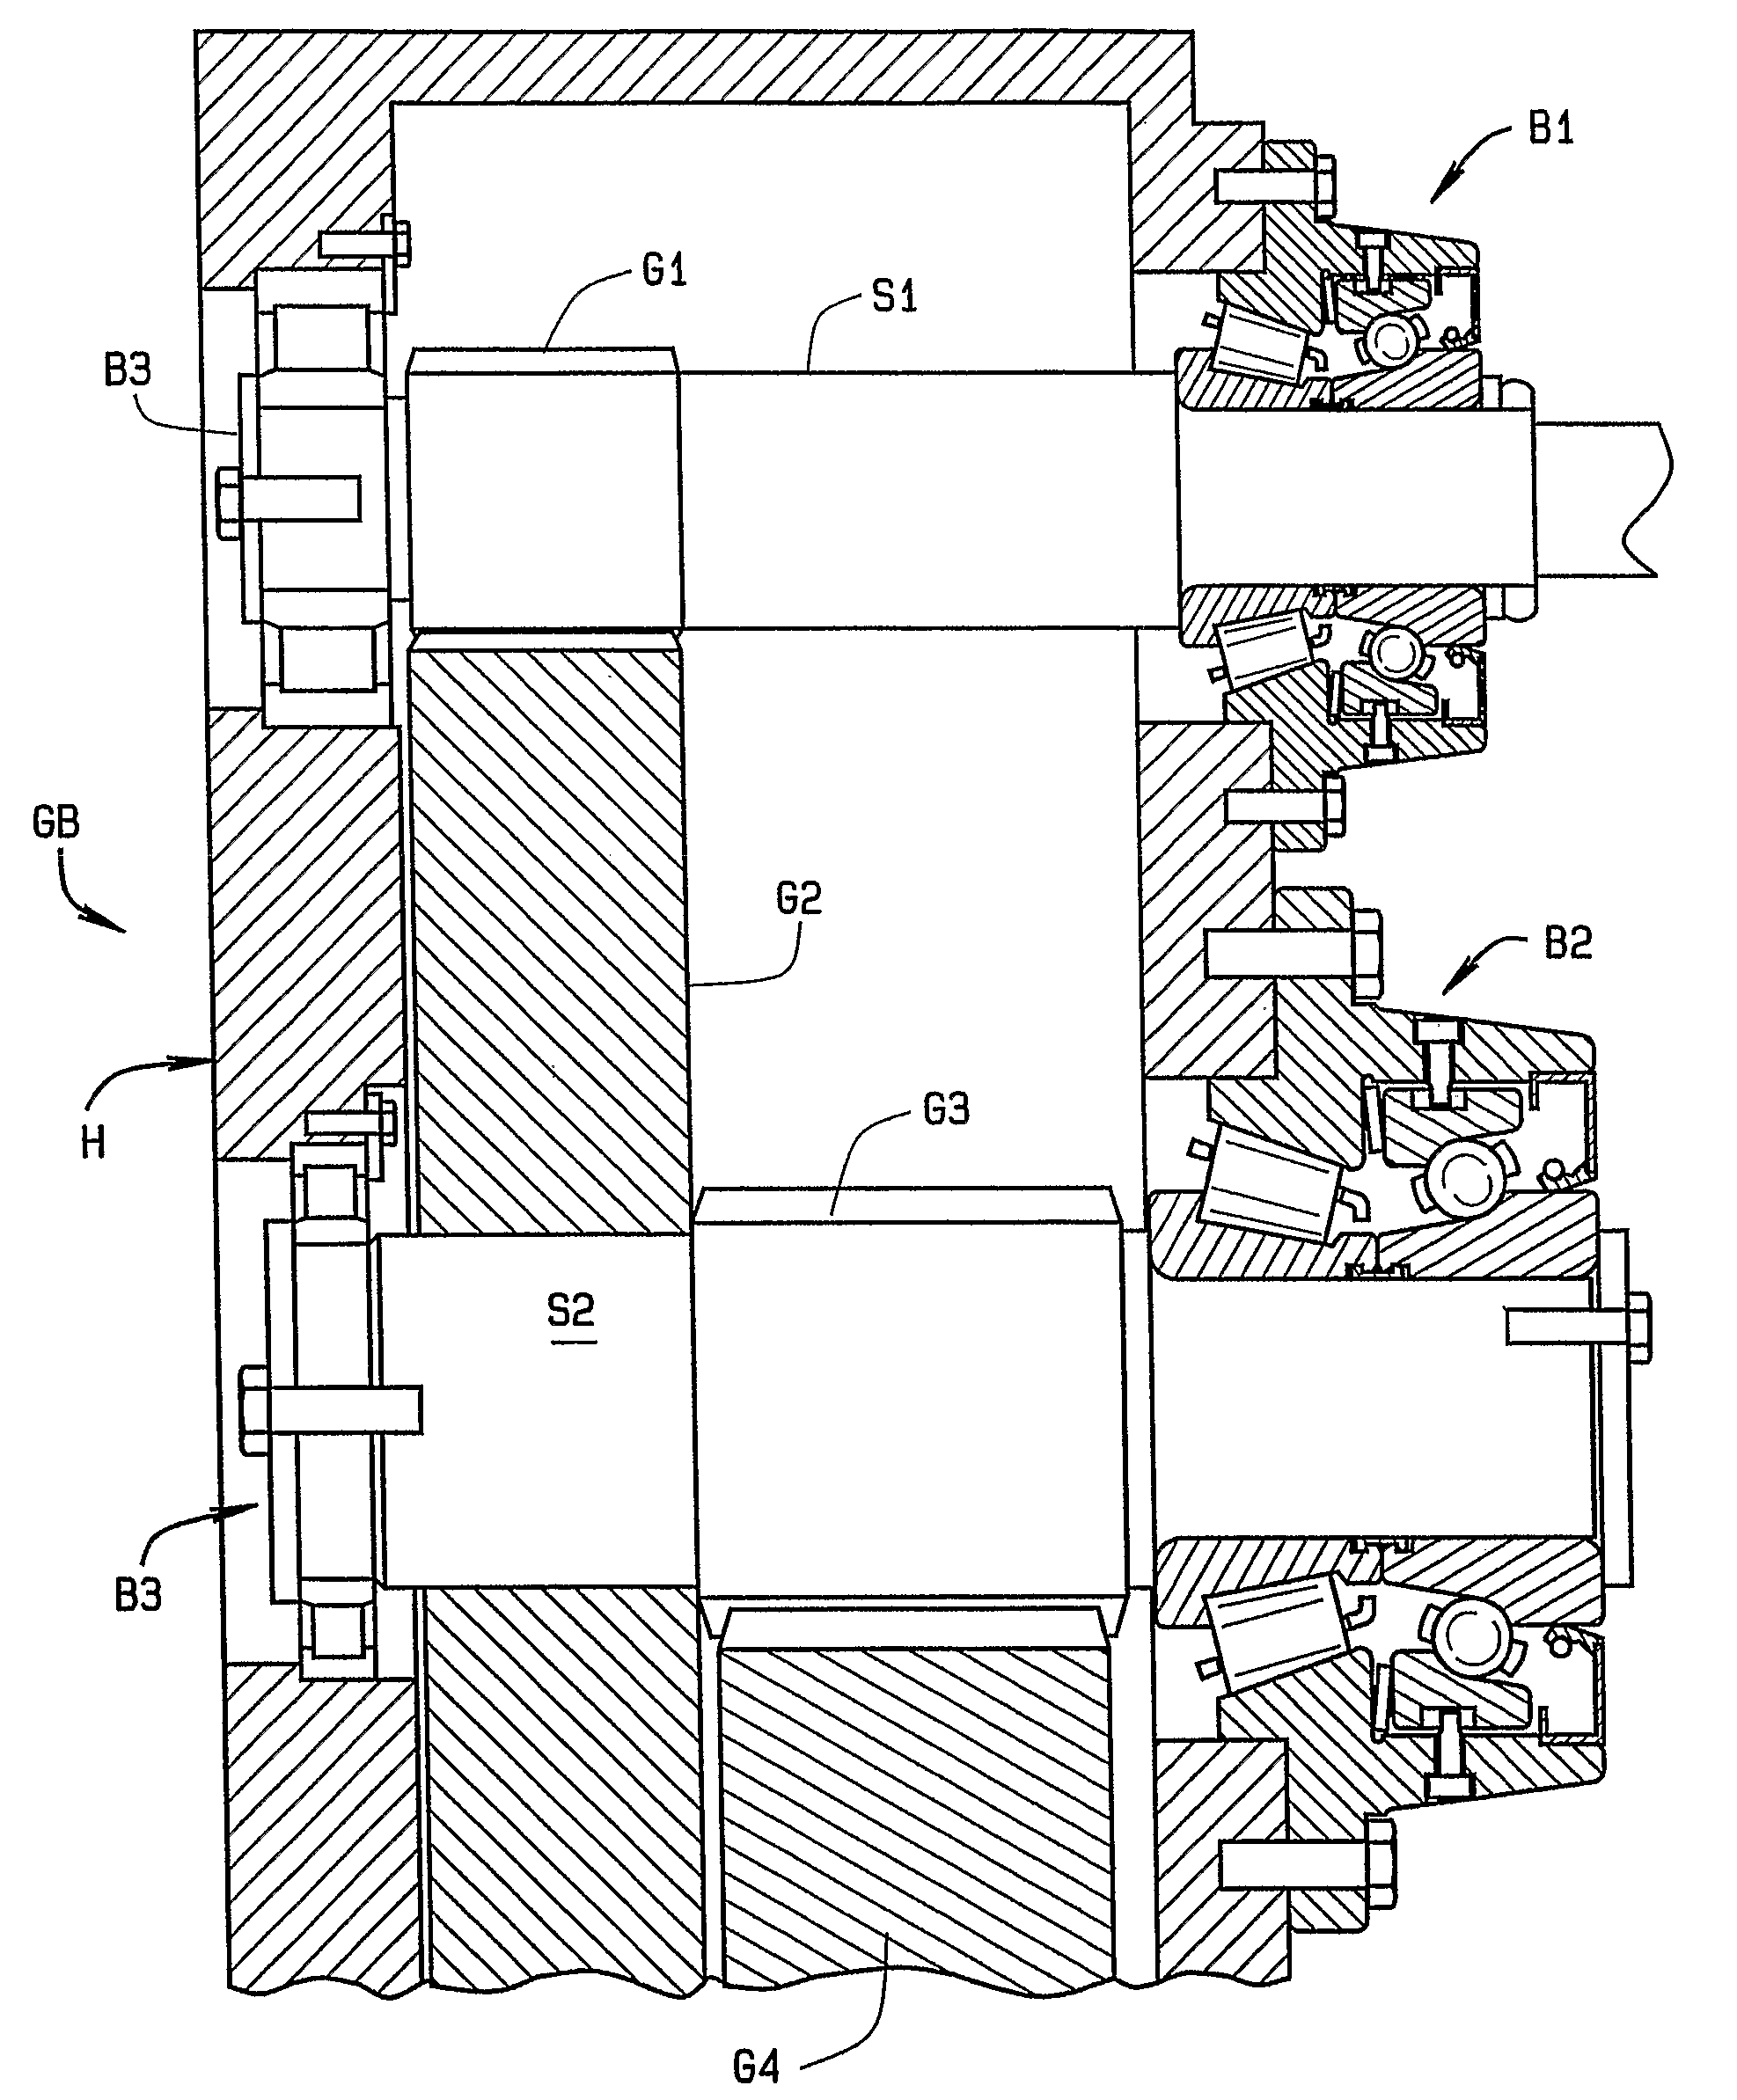 Locating bearing assembly for wind turbine gearbox shaft